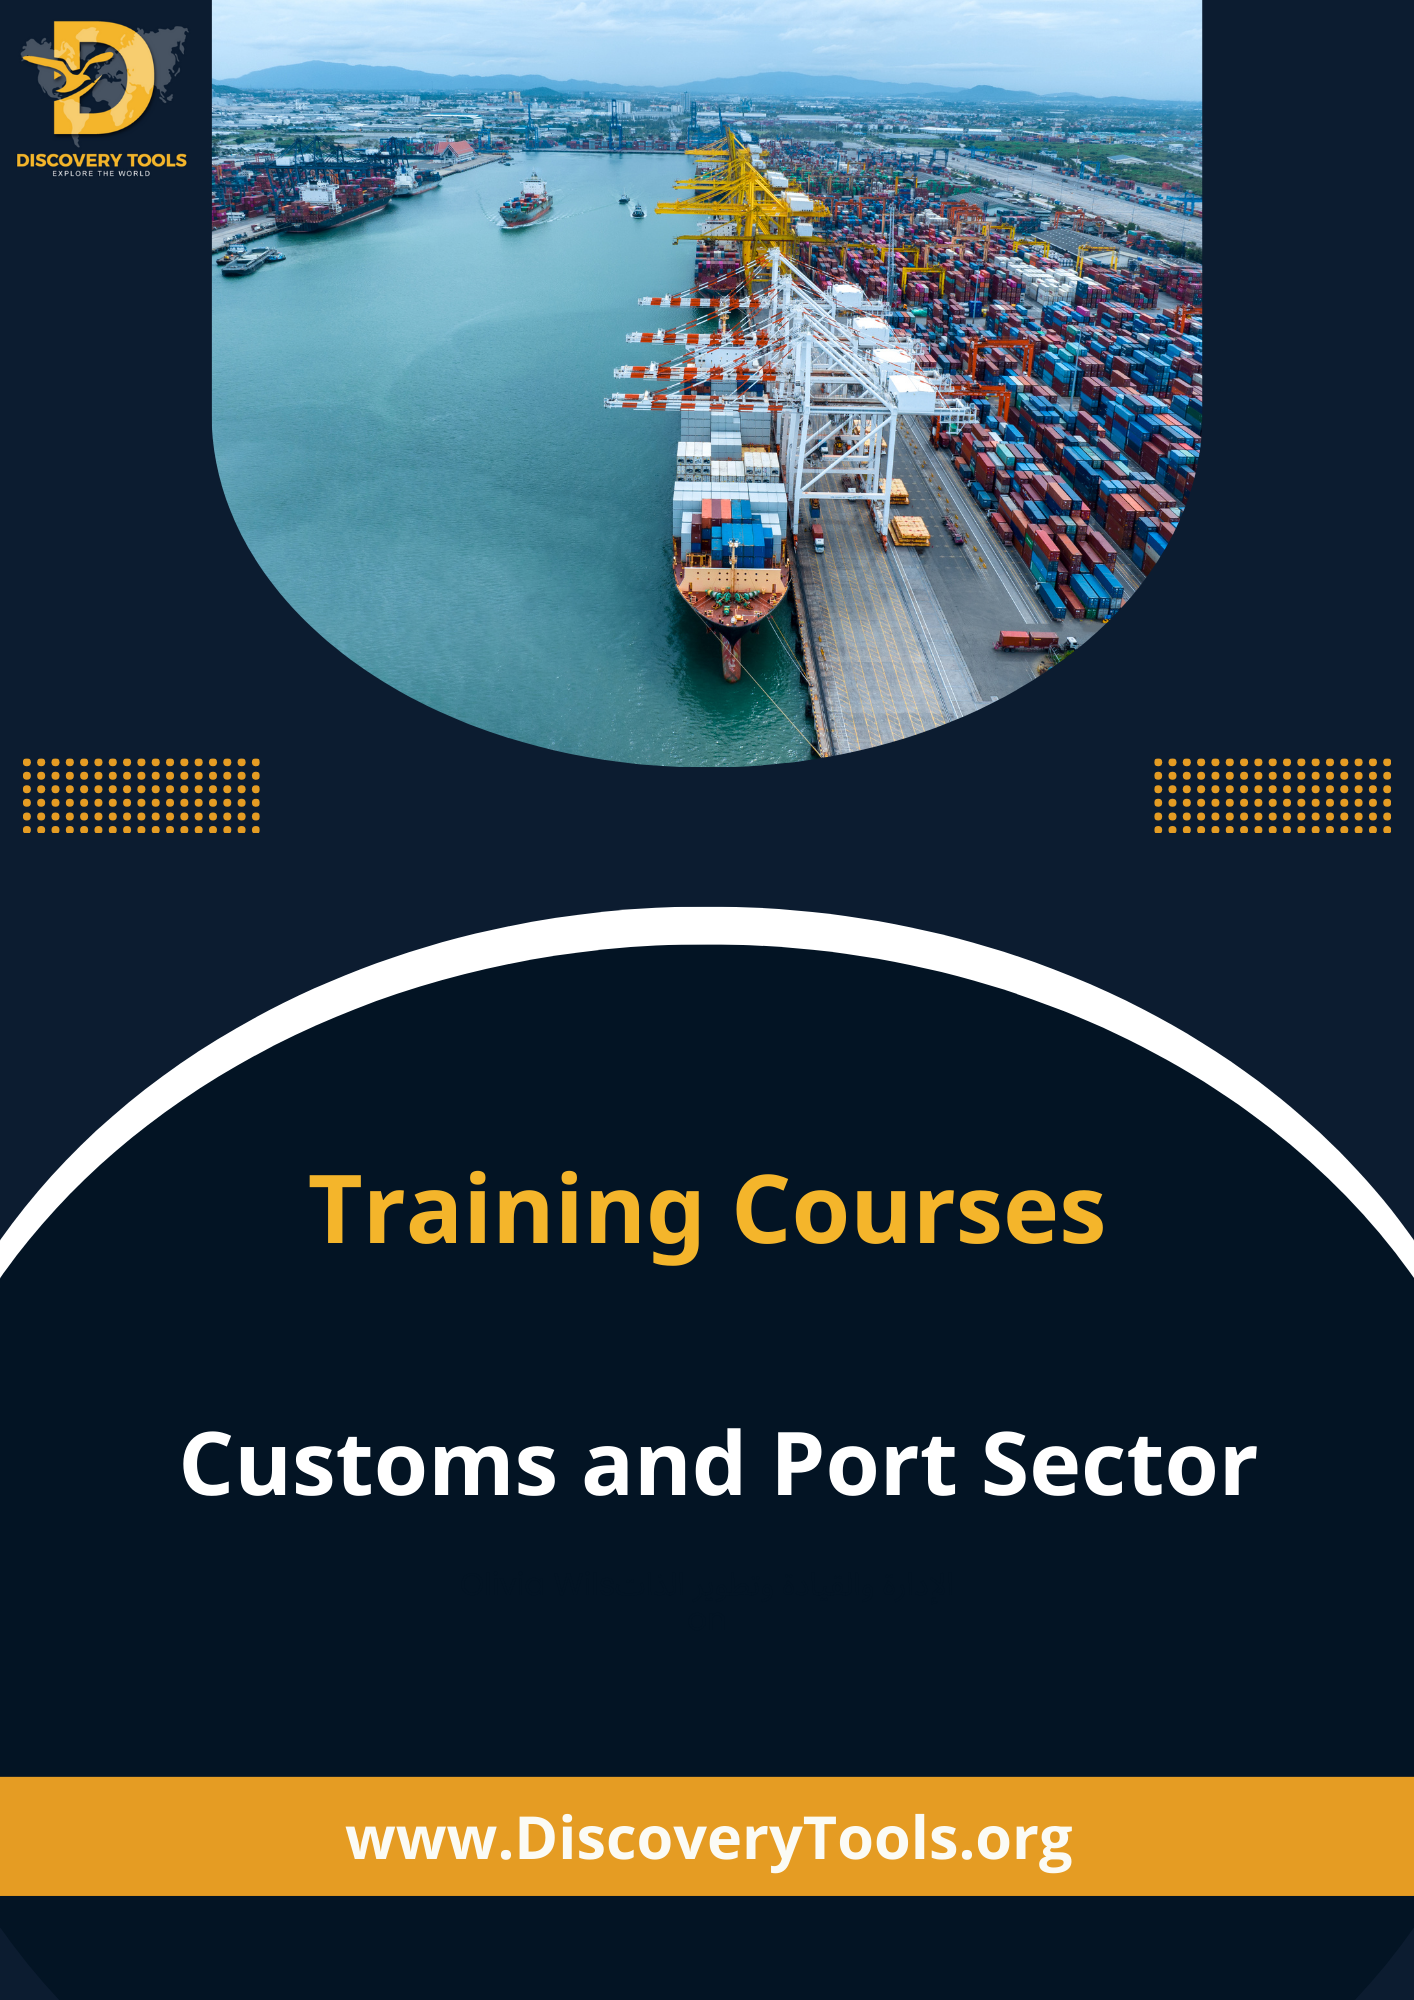 Customs and Port Sector